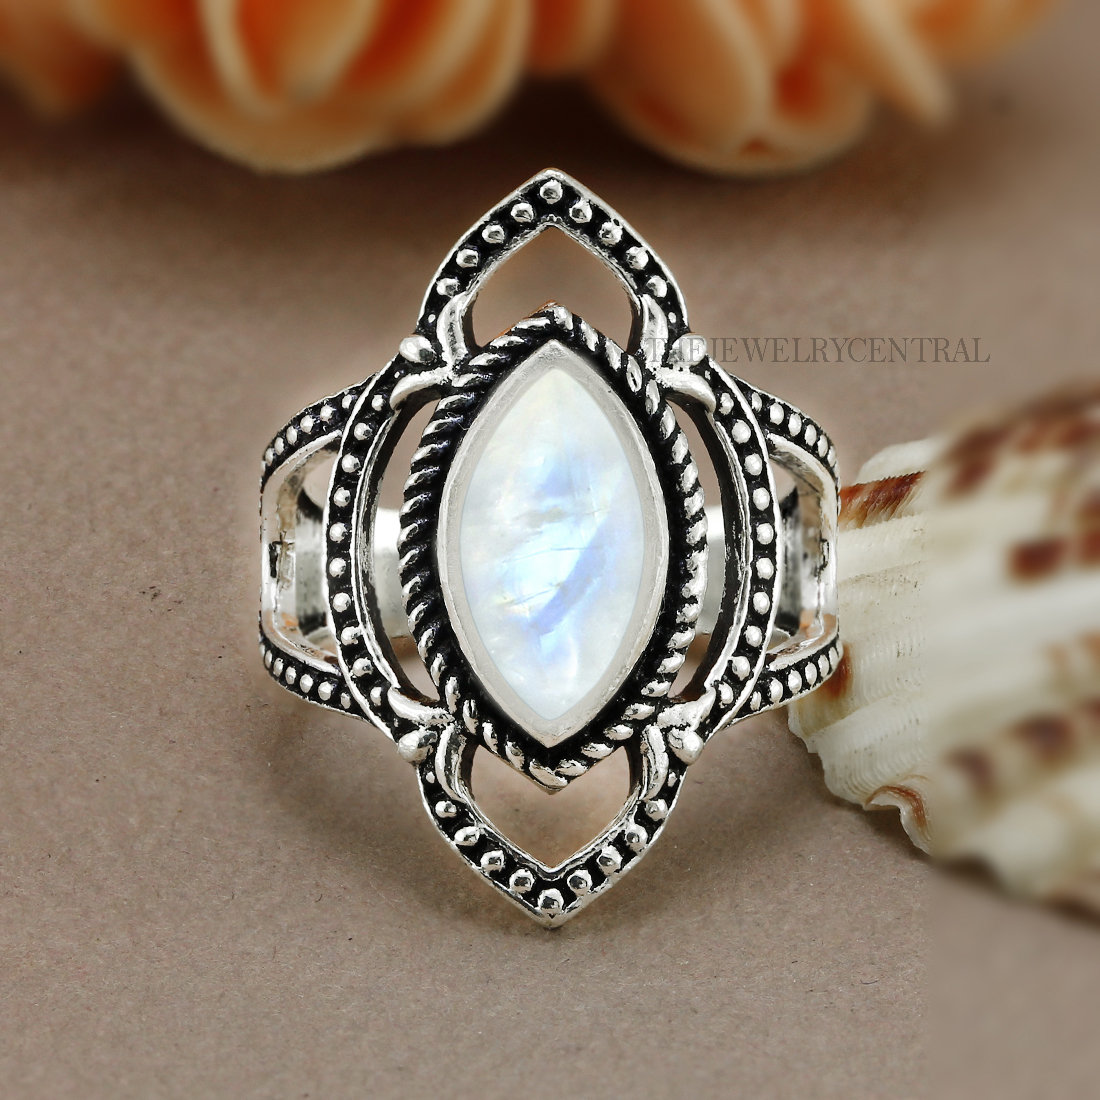 Excited to share the latest addition to my #etsy shop: Natural Rainbow Moonstone Ring, Blue Fire Moonstone Ring, 925 Sterling Silver Ring, Boho Ring, Statement Silver Ring, Handmade Ring, Gift etsy.me/3wXsLkI #silver #moonstonering #unisexadults #yes #stone